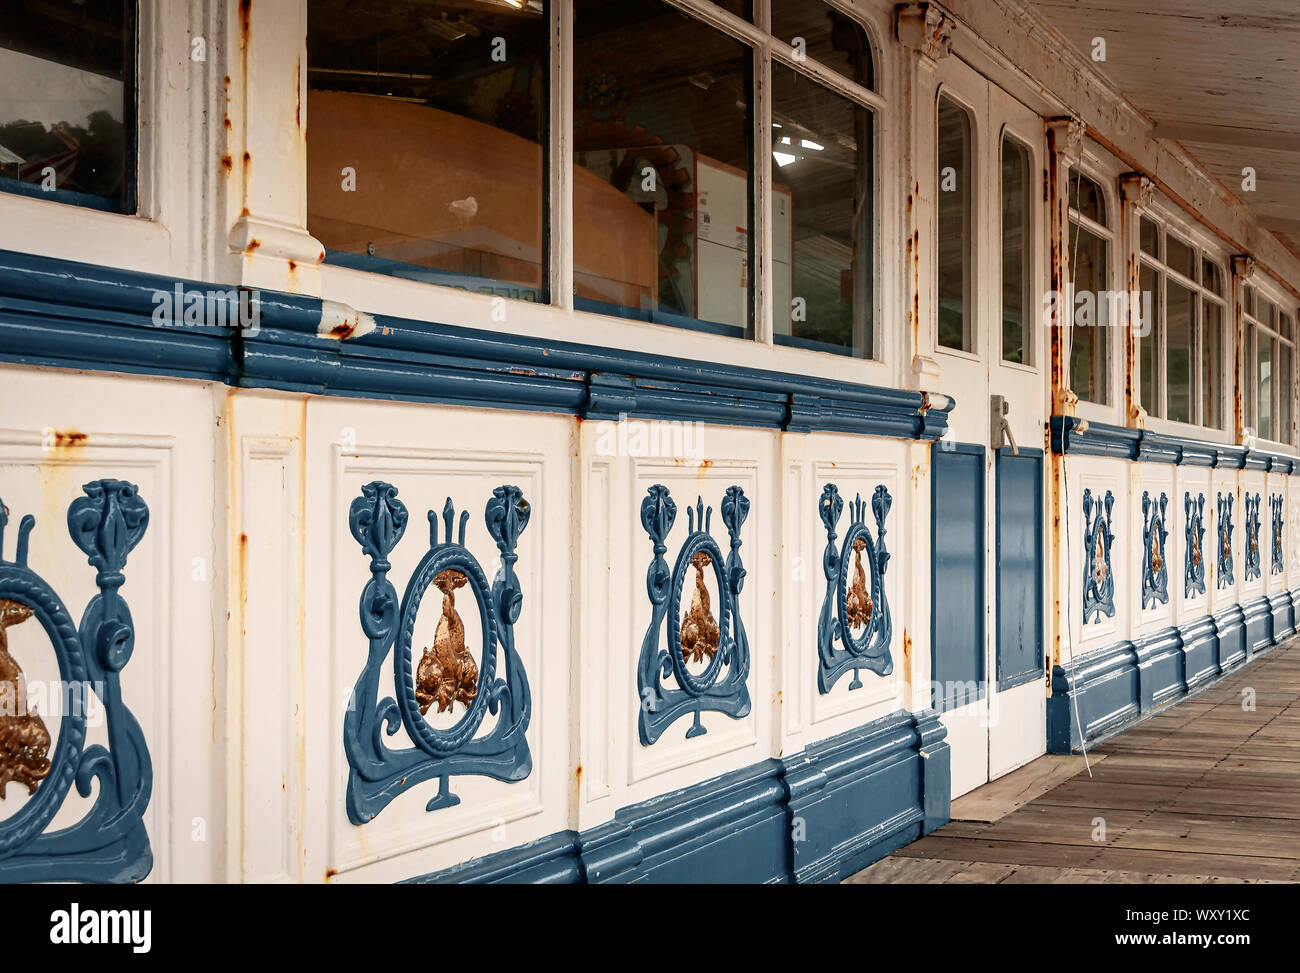 The side of the amusement arcade on Llandudno pier.  Backs of cabinets are against the windows and emblems adorn the wooden panels. The metalwork is r Stock Photo